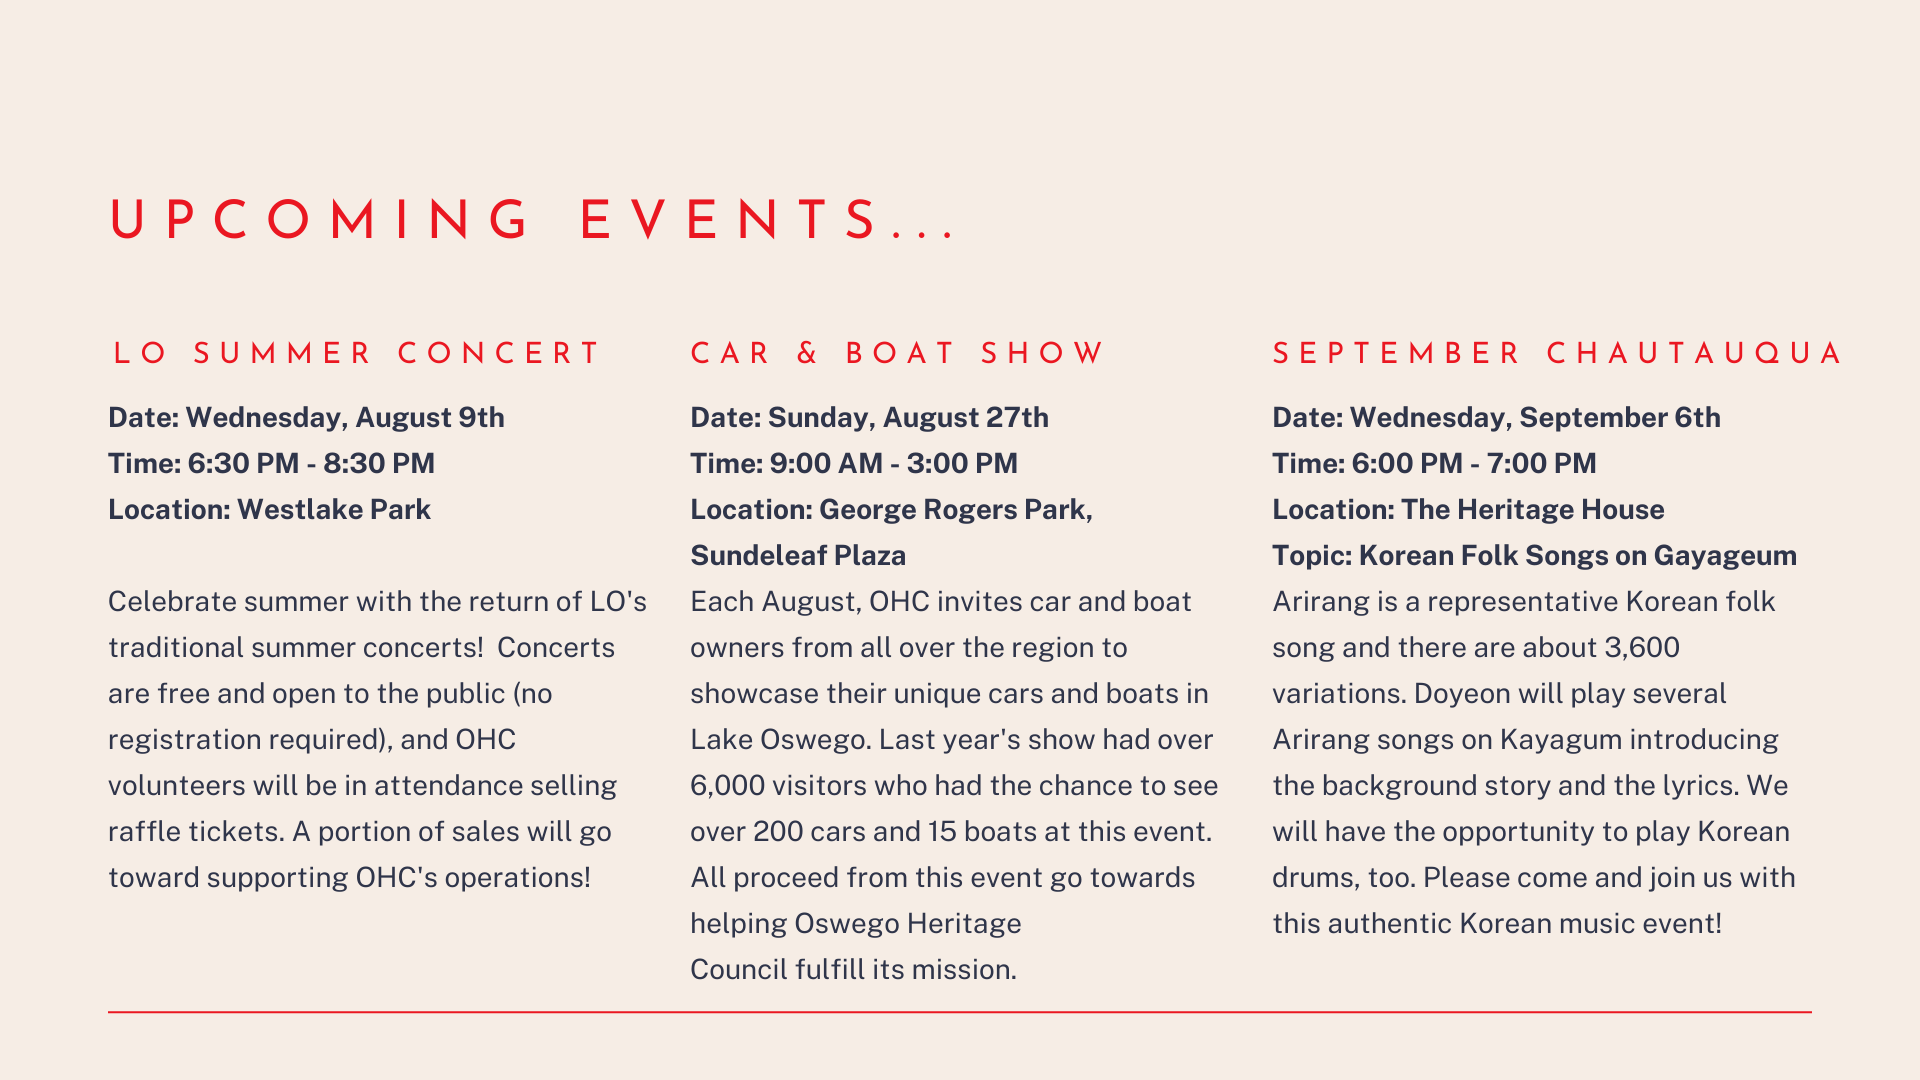 Upcoming events: LO Summer Concert on Wednesday August 9th from 6:30 PM - 8:30 PM at Westlake Park. The Car & Boat Show on Sunday, August 27th from 9:00 AM - 3:00 PM at George Rogers Park, Sundeleaf Plaza. The September Chautauqua on Wednesday, September 6th from 5:00 PM - 6:00 PM at the Heritage House featuring Korean folk songs on Gayageum.